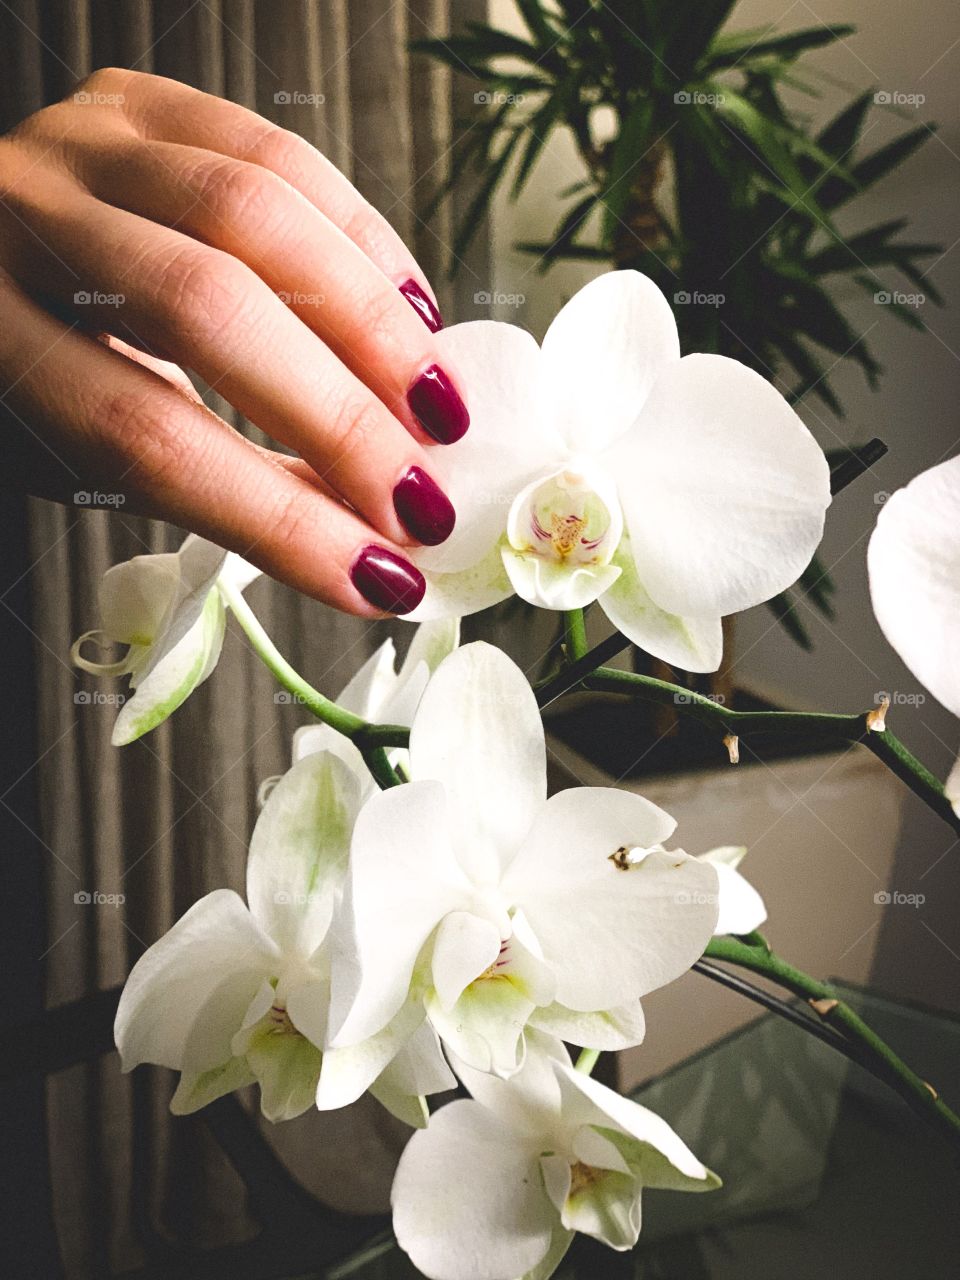 Perfect manicure and flowers touch